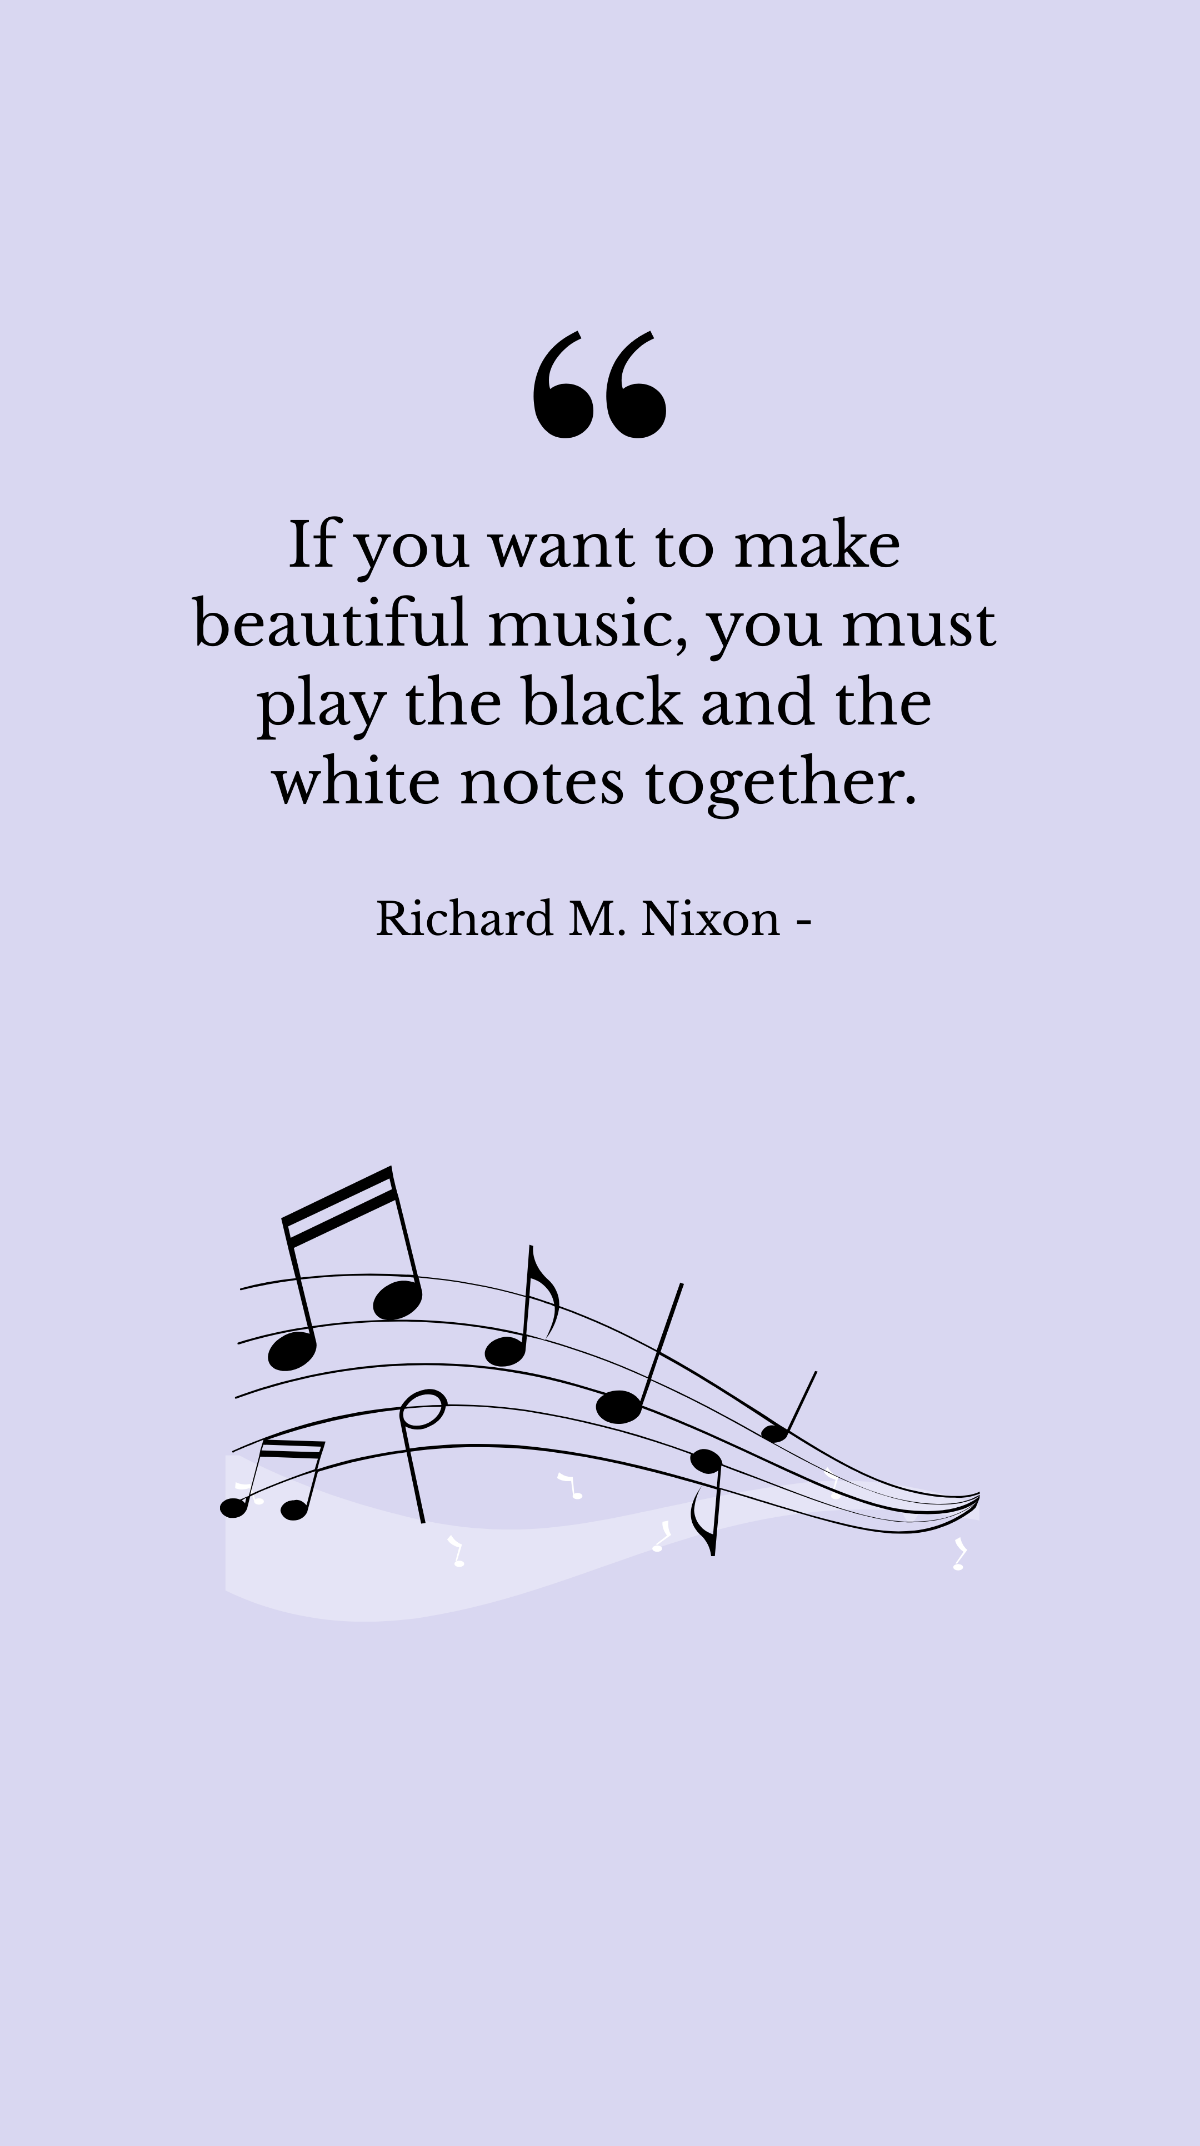 Richard M. Nixon - If you want to make beautiful music, you must play the black and the white notes together. Template